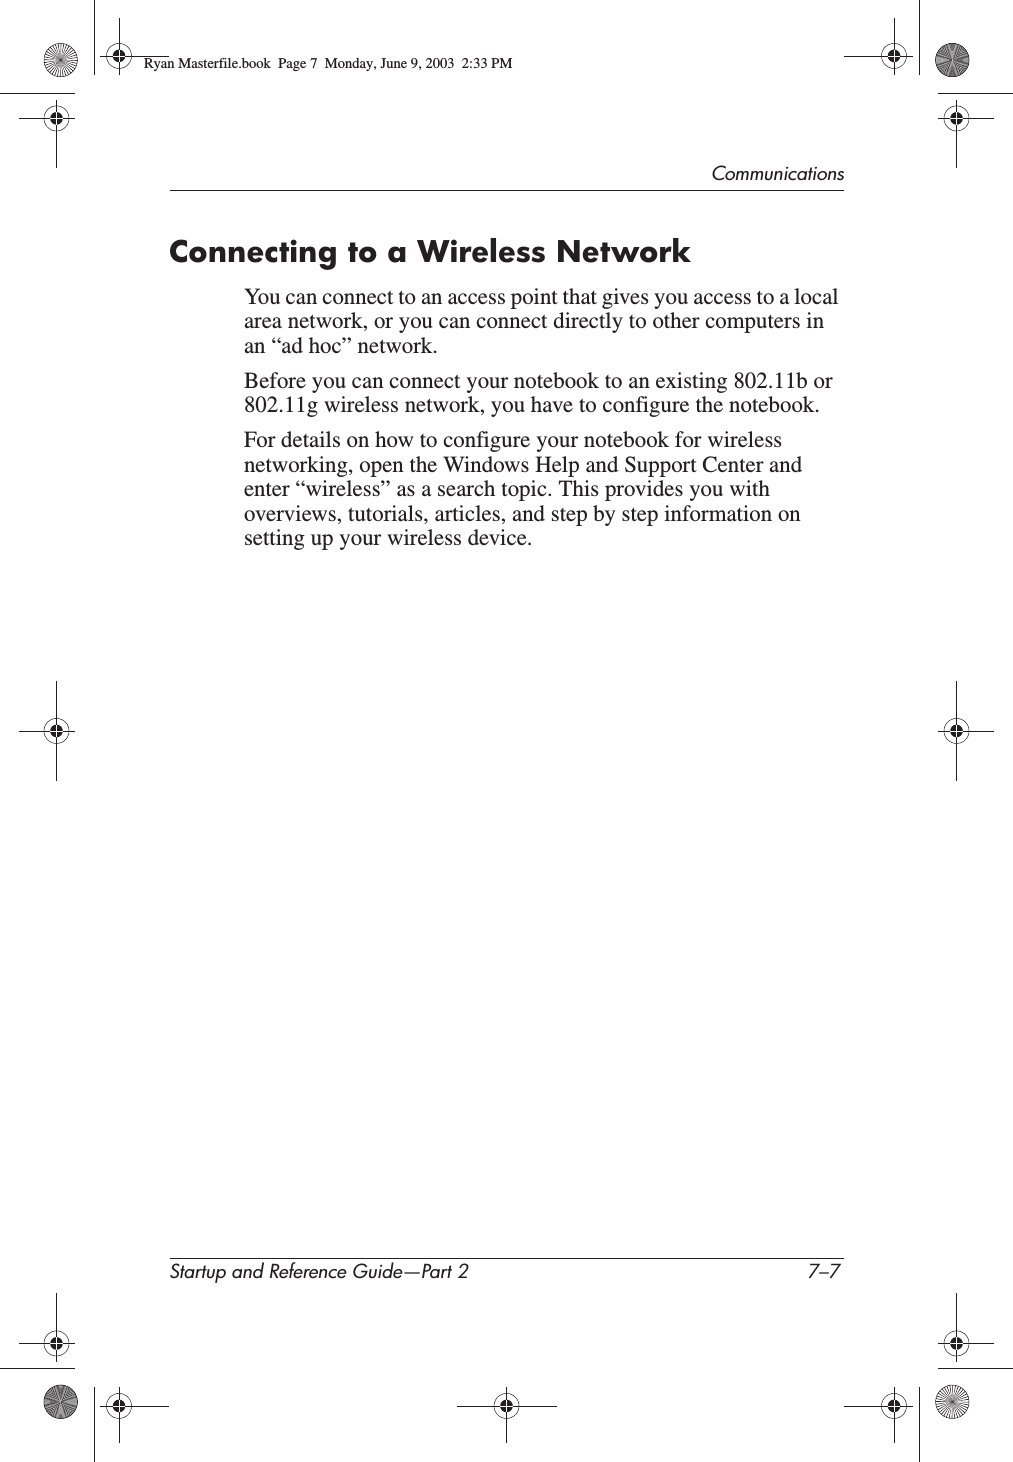 CommunicationsStartup and Reference Guide—Part 2 7–7Connecting to a Wireless NetworkYou can connect to an access point that gives you access to a local area network, or you can connect directly to other computers in an “ad hoc” network.Before you can connect your notebook to an existing 802.11b or 802.11g wireless network, you have to configure the notebook.For details on how to configure your notebook for wireless networking, open the Windows Help and Support Center and enter “wireless” as a search topic. This provides you with overviews, tutorials, articles, and step by step information on setting up your wireless device.Ryan Masterfile.book  Page 7  Monday, June 9, 2003  2:33 PM